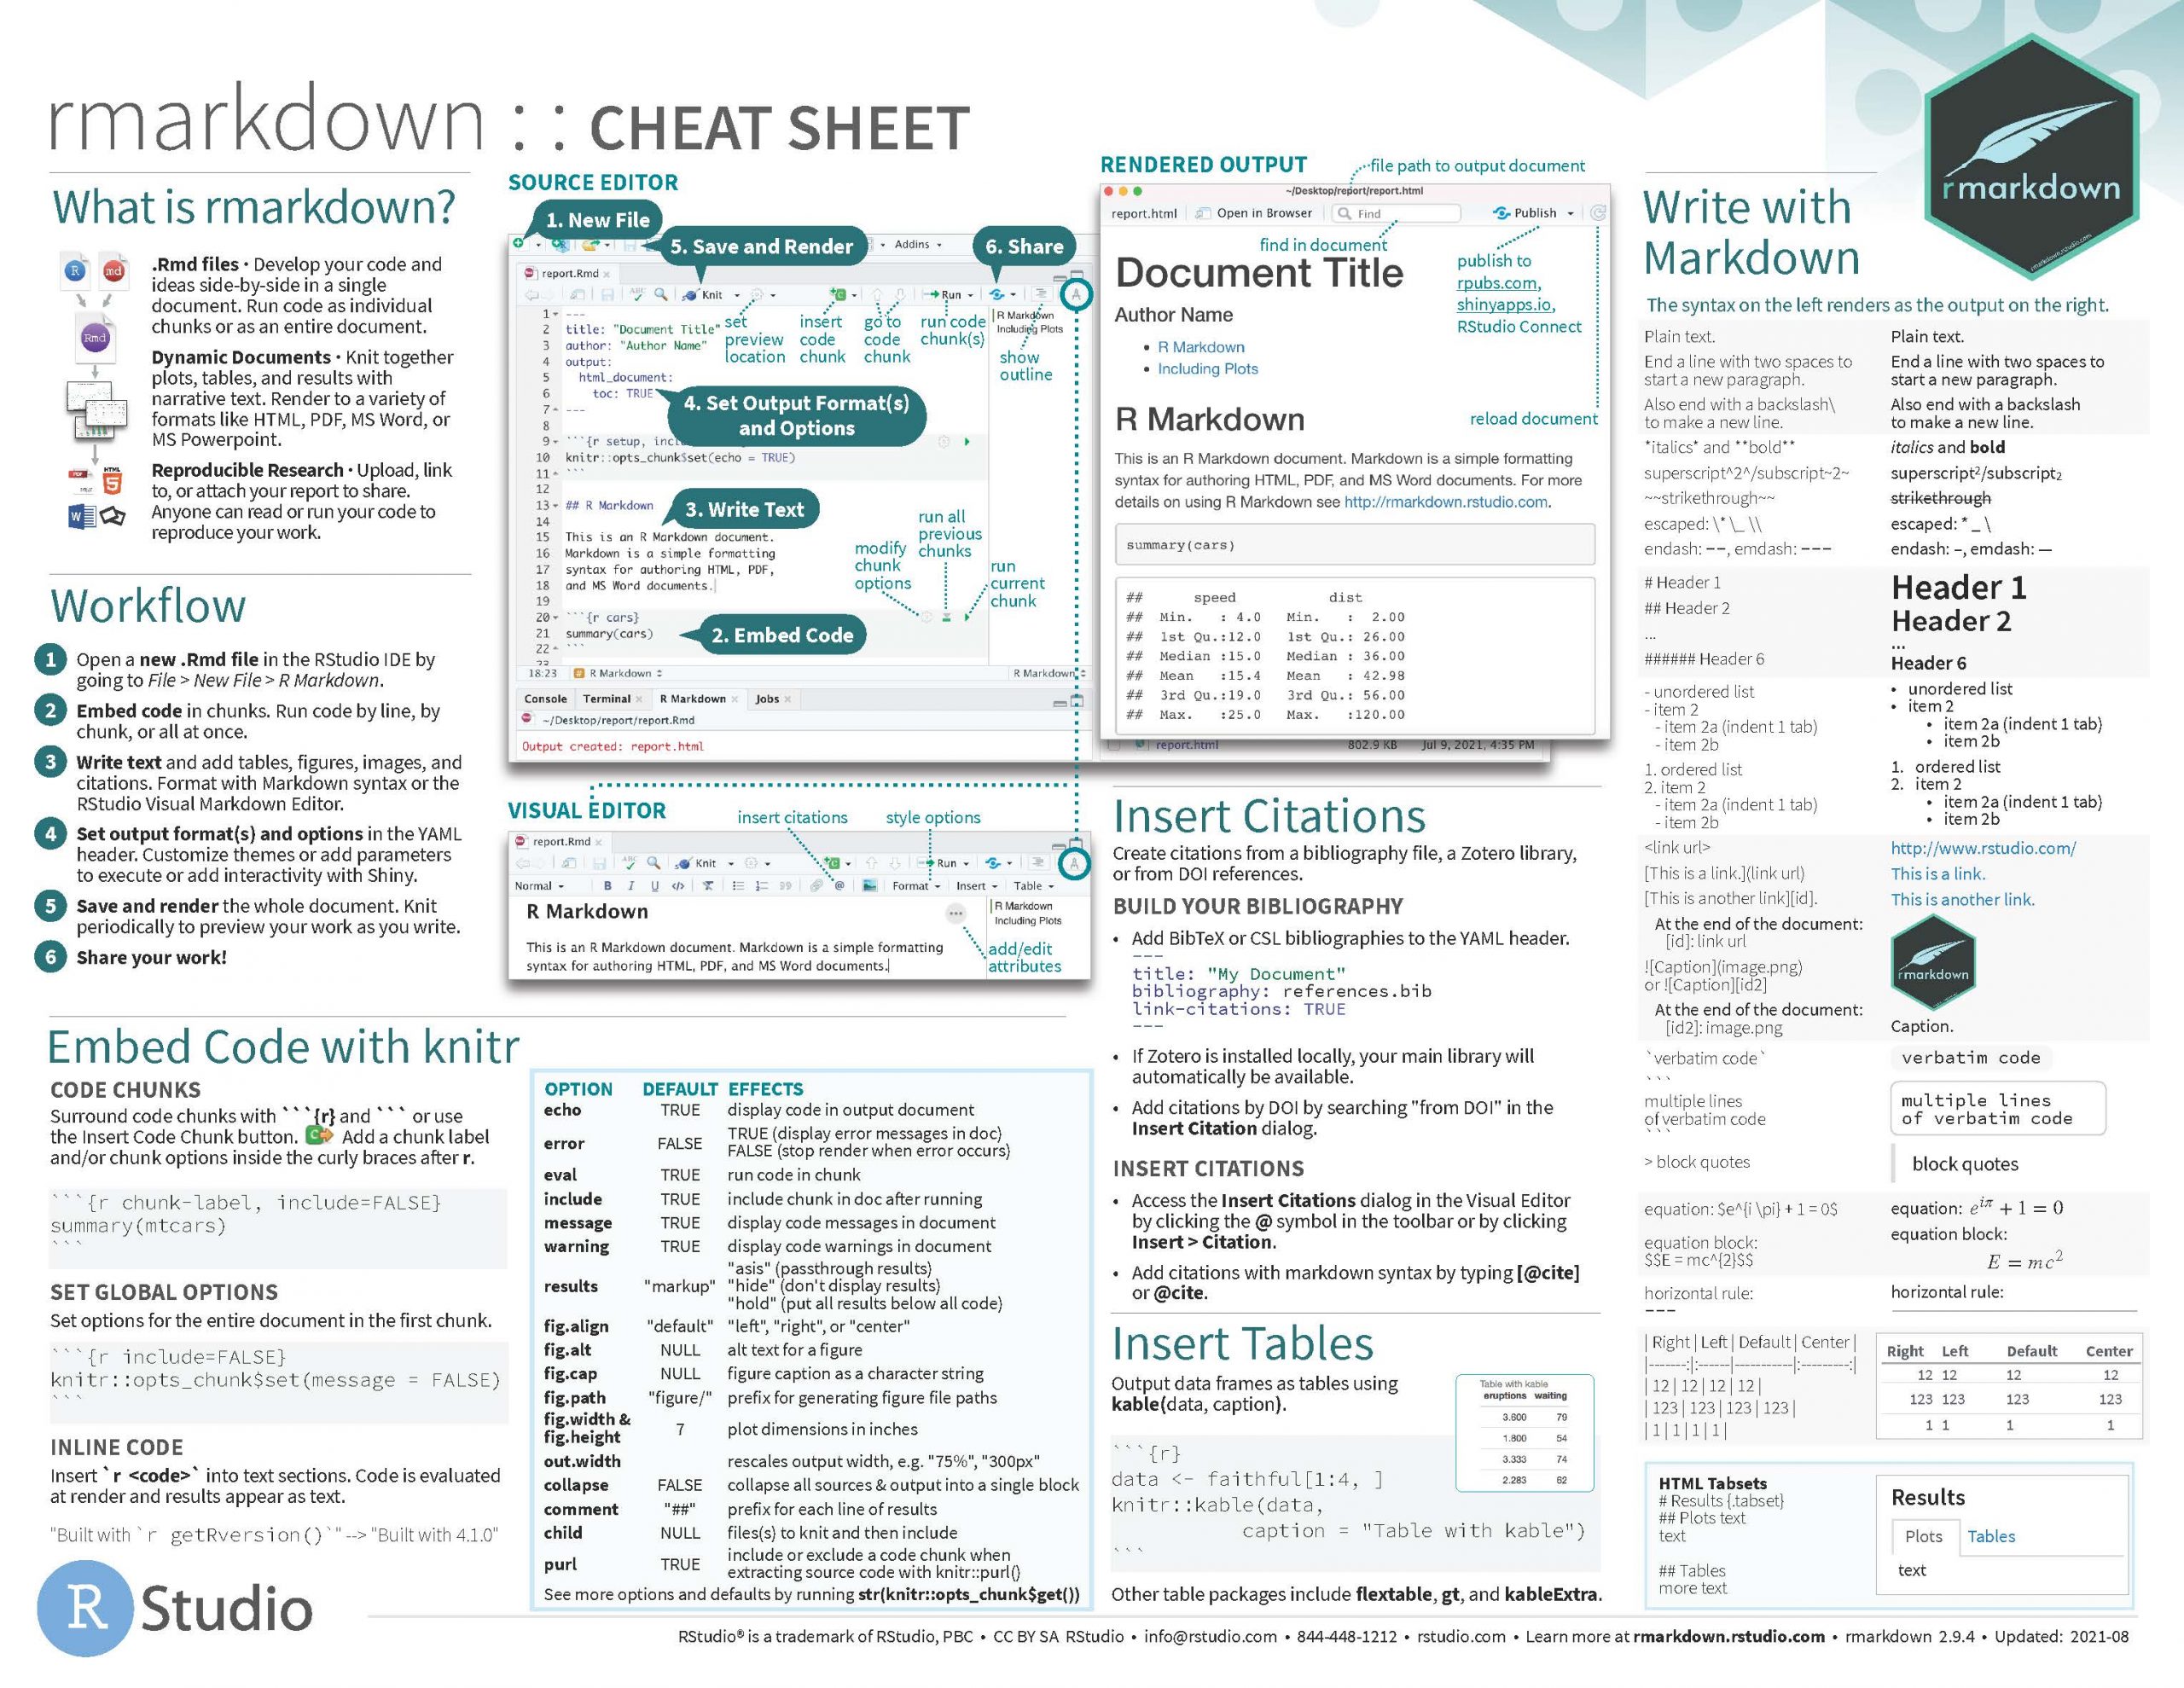 The first page of an RMarkdown cheatsheet with key commands, code and options.